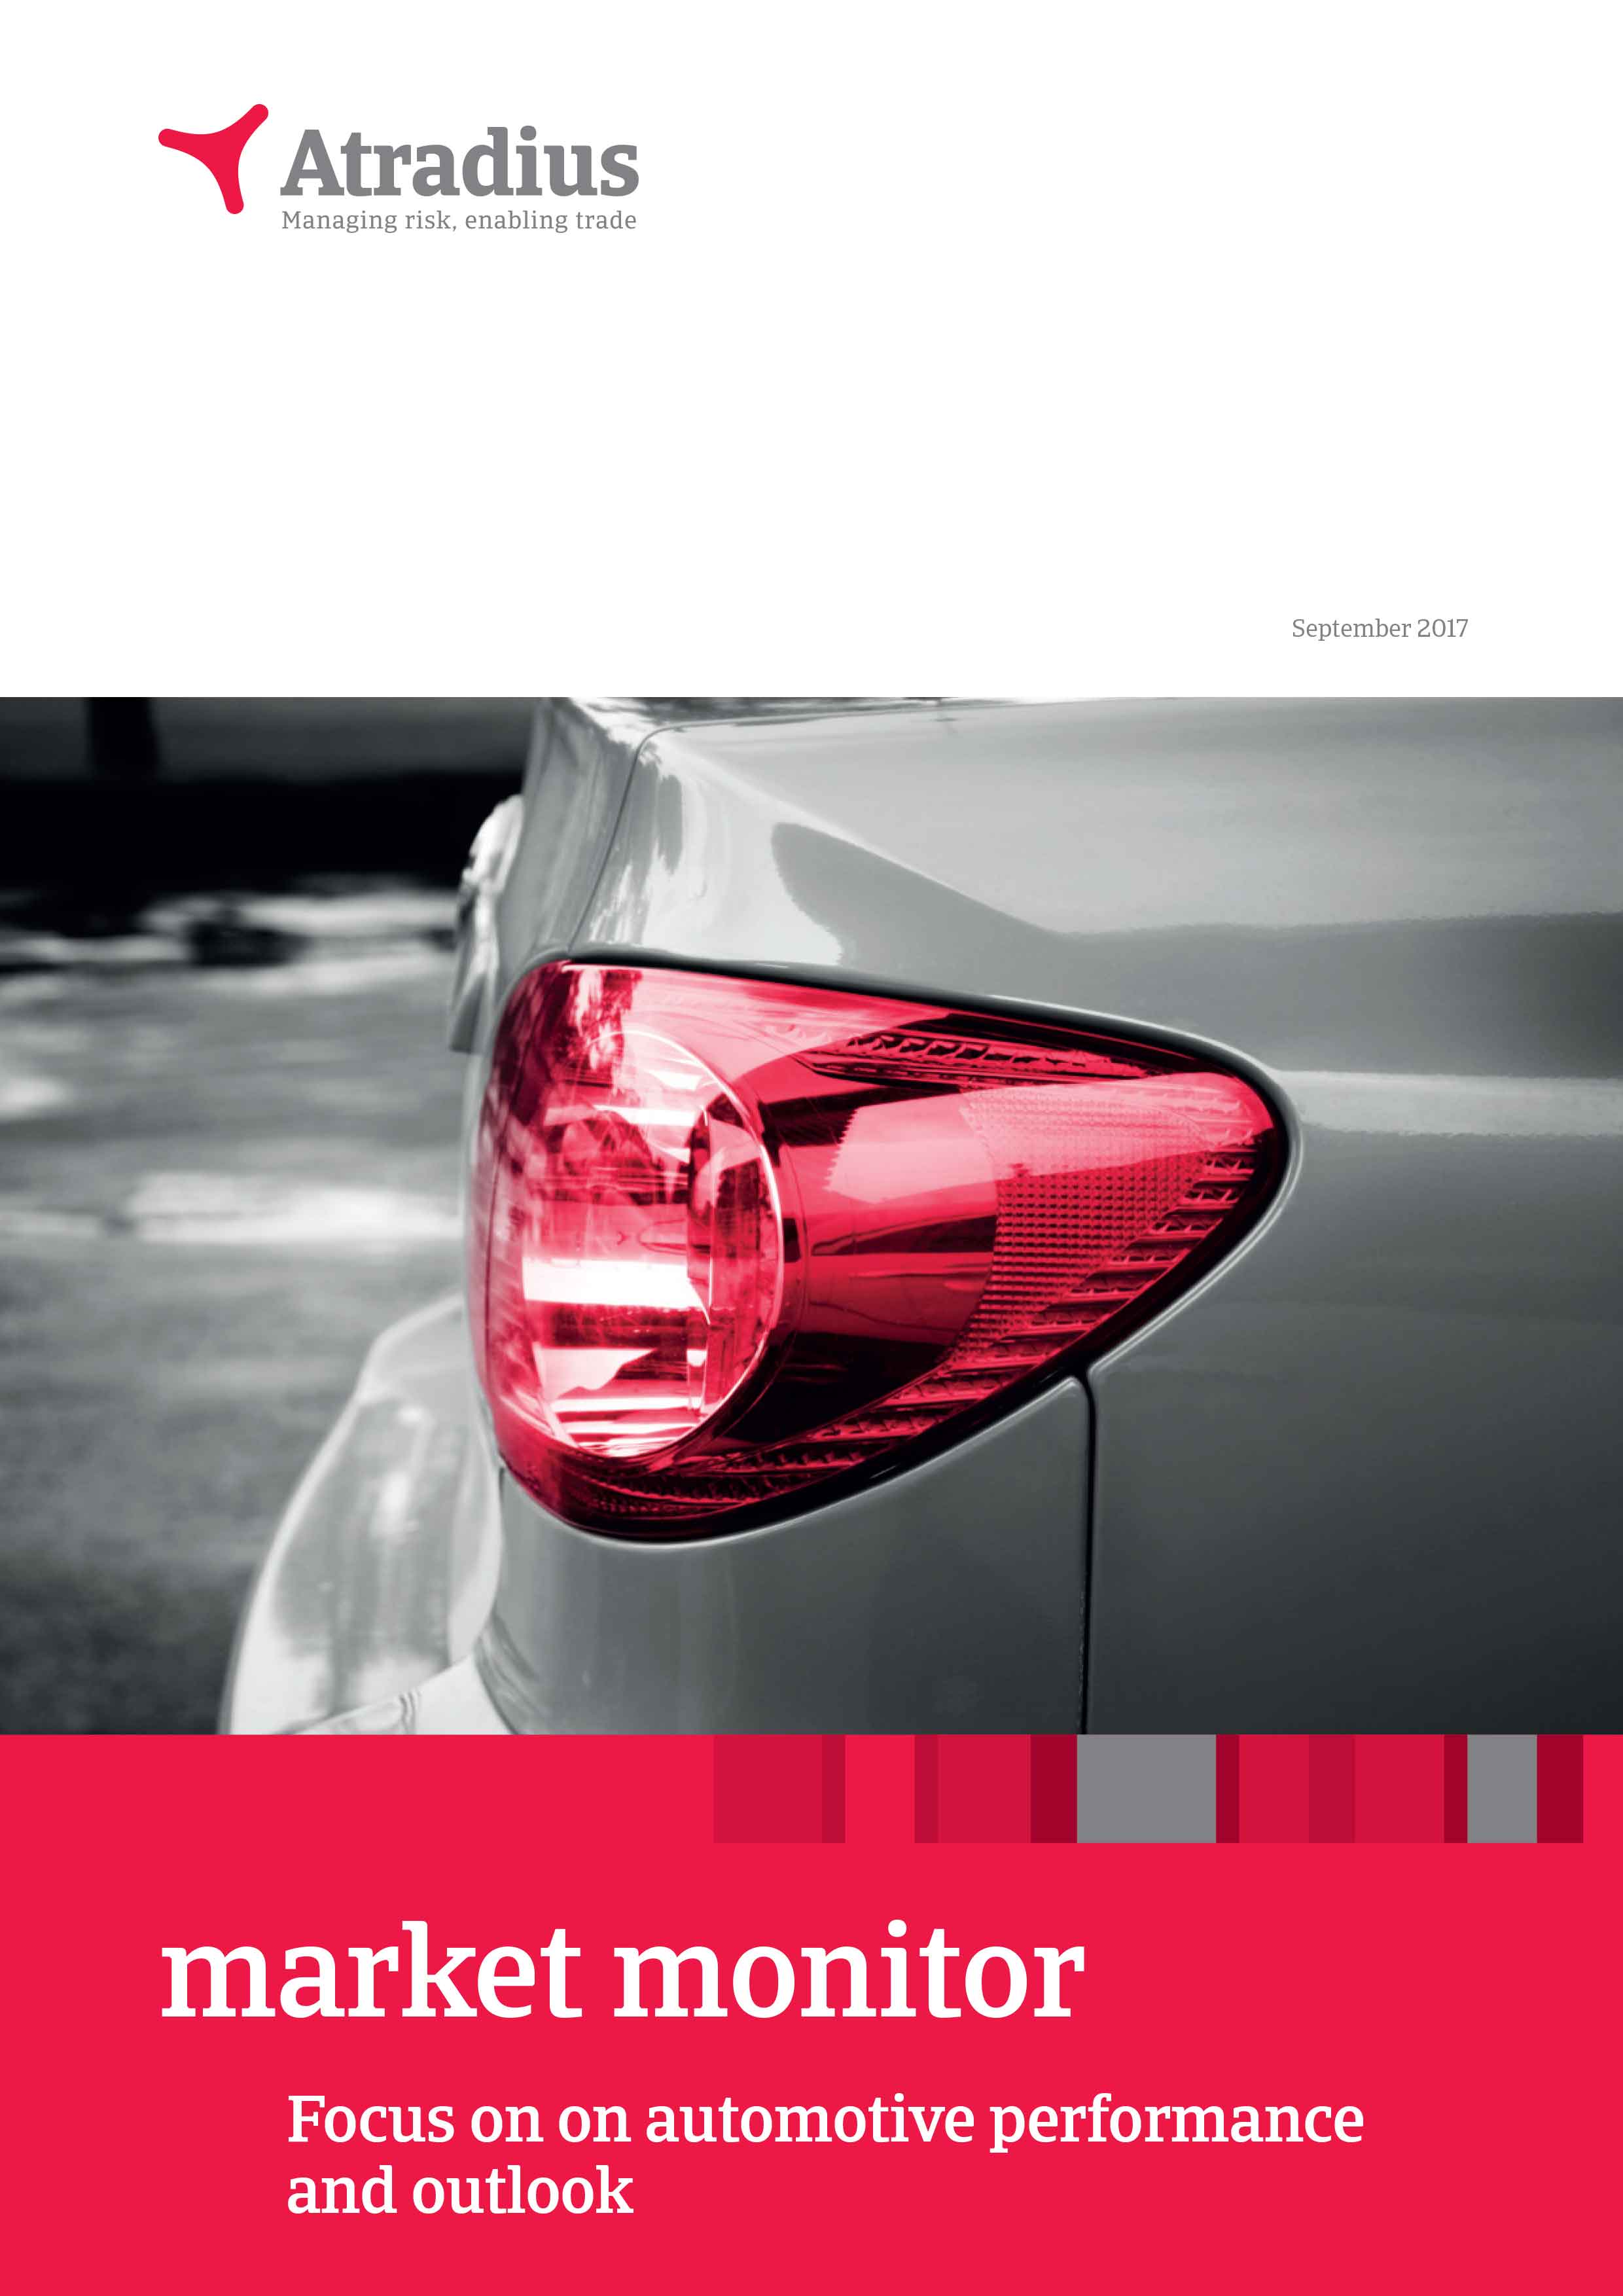 Focus on automotive performance and outlook